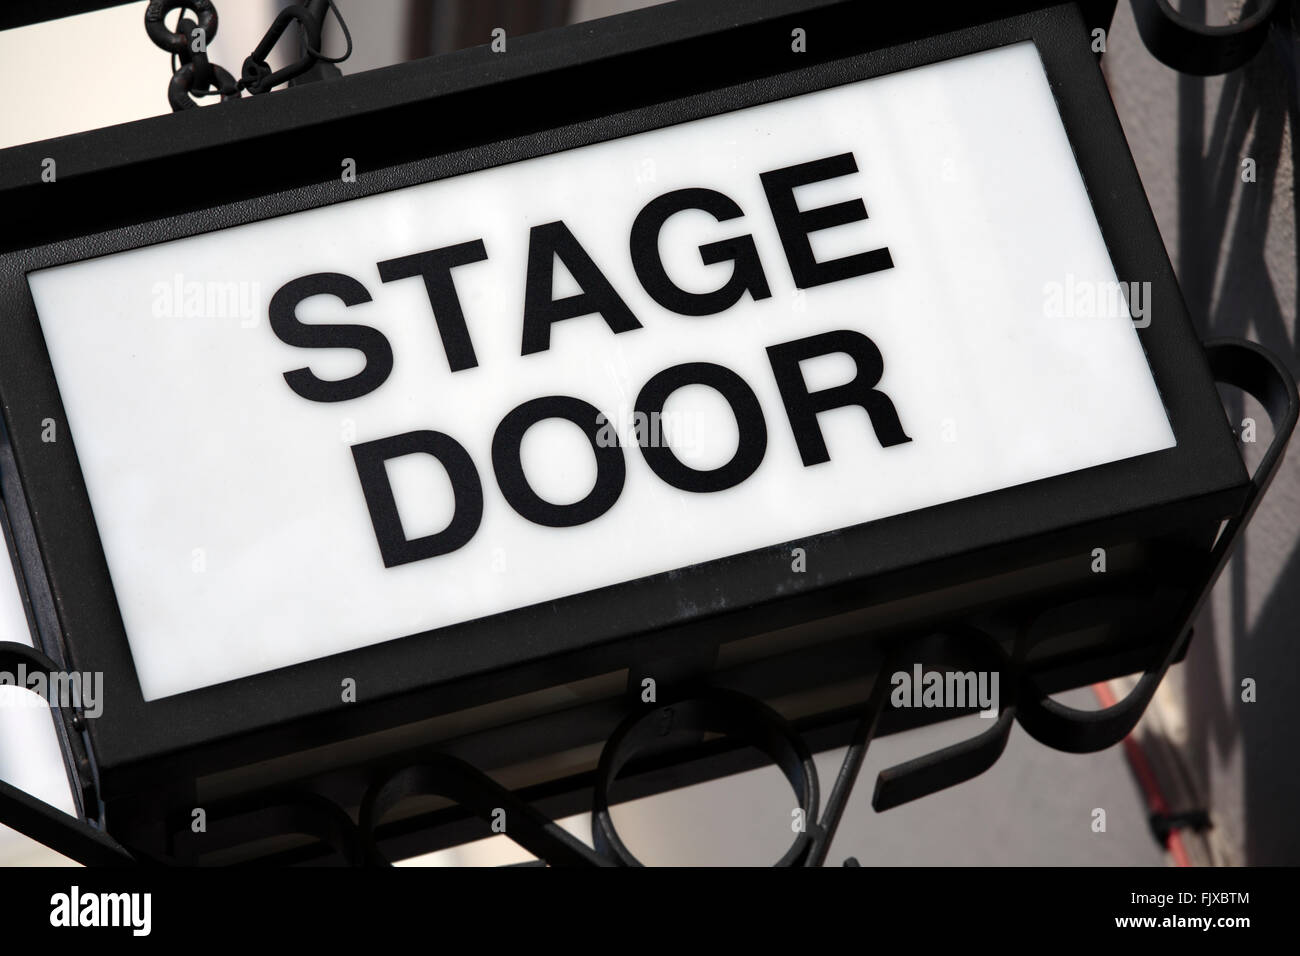 Stage door sign in black metal and white. Stock Photo